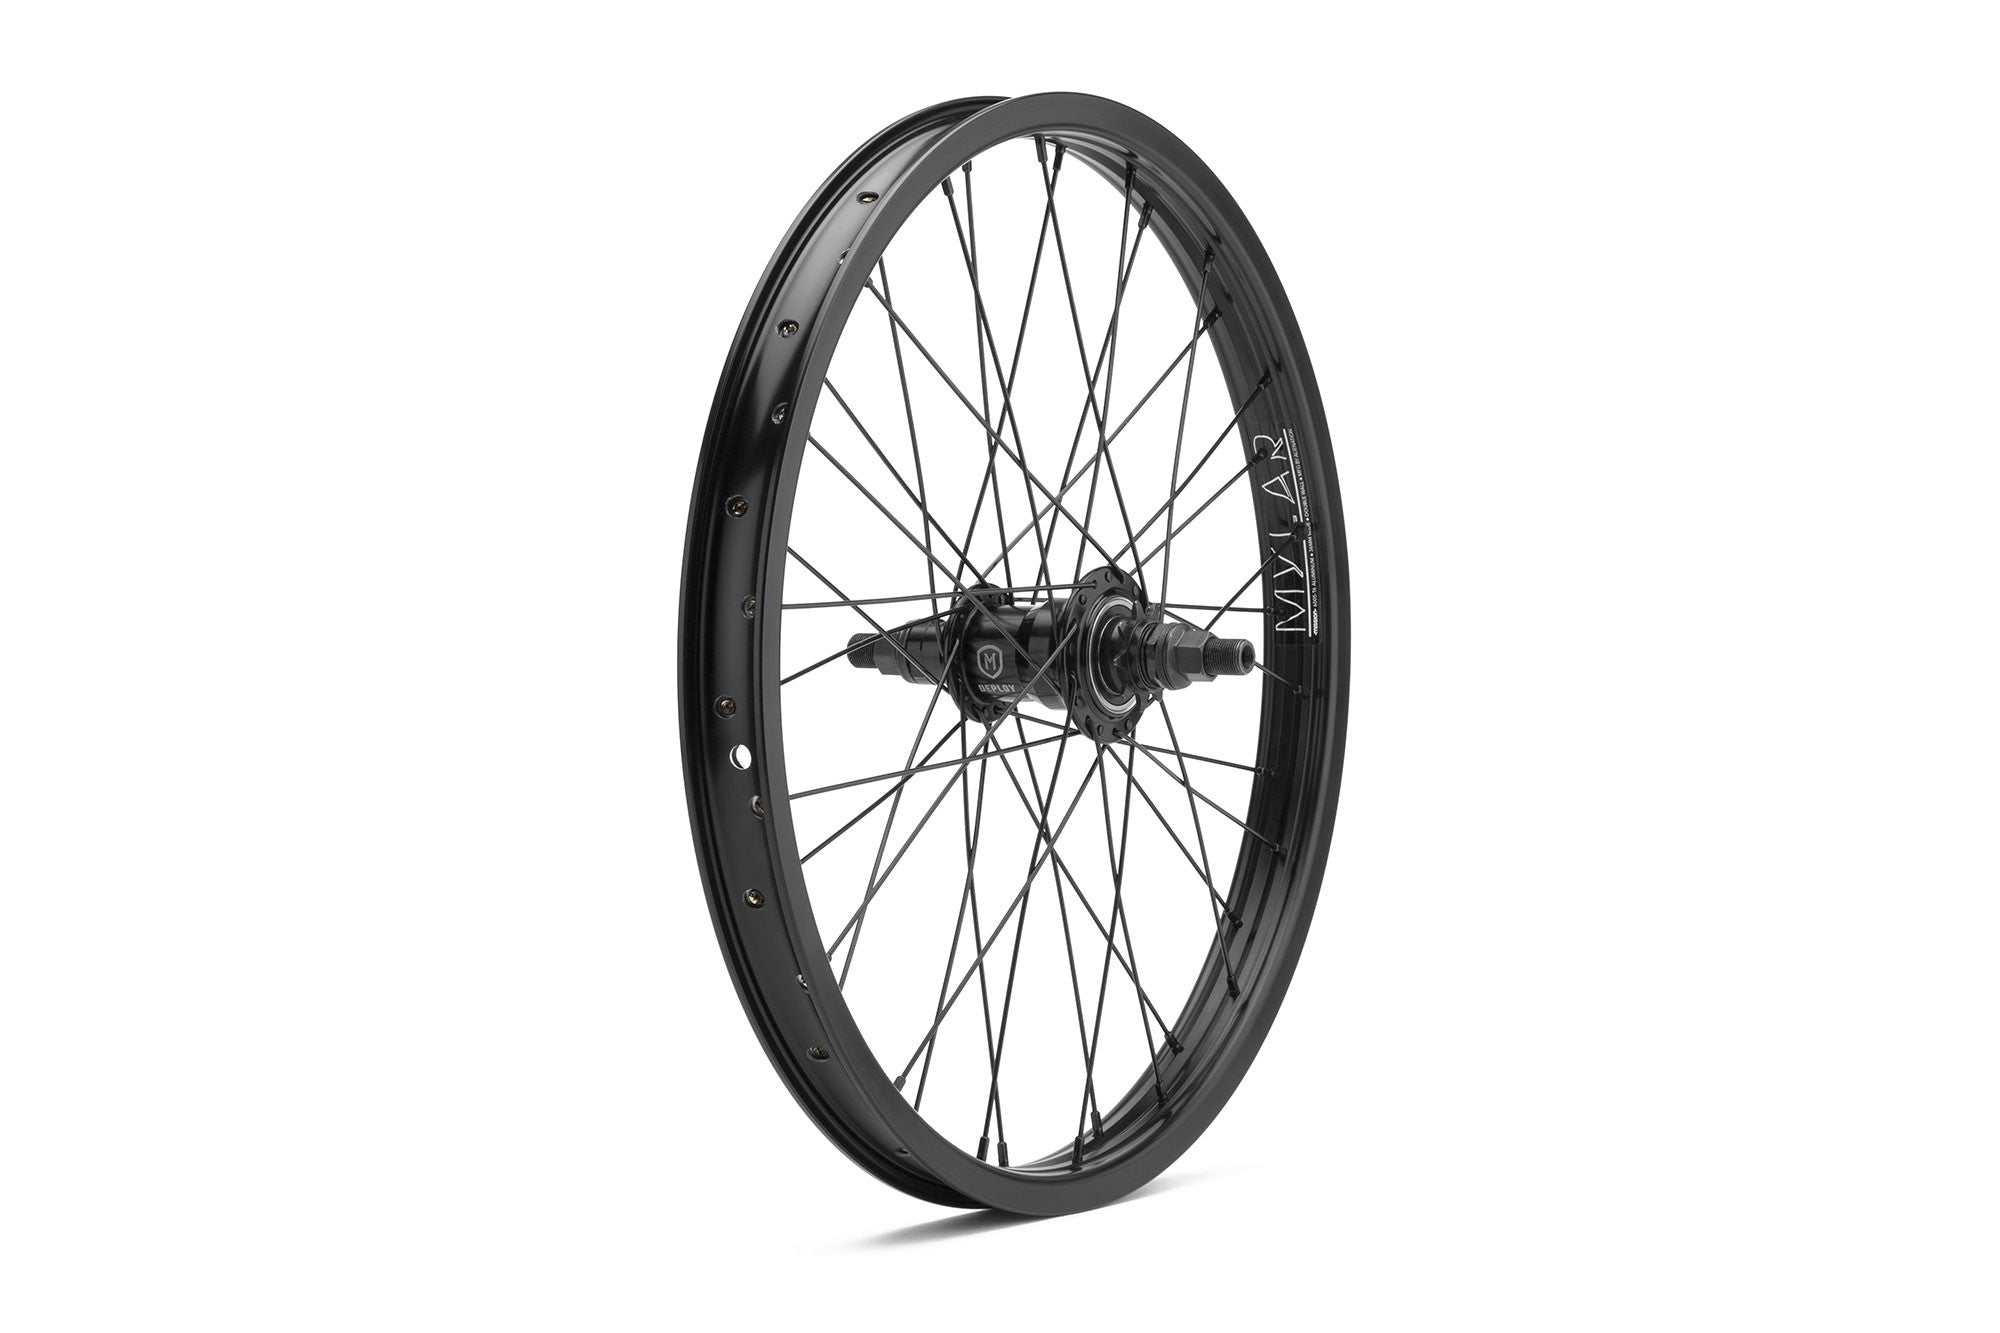 Mission Deploy Freecoaster Rear Wheel (Black Or Black/Silver) - Downtown Bicycle Works 